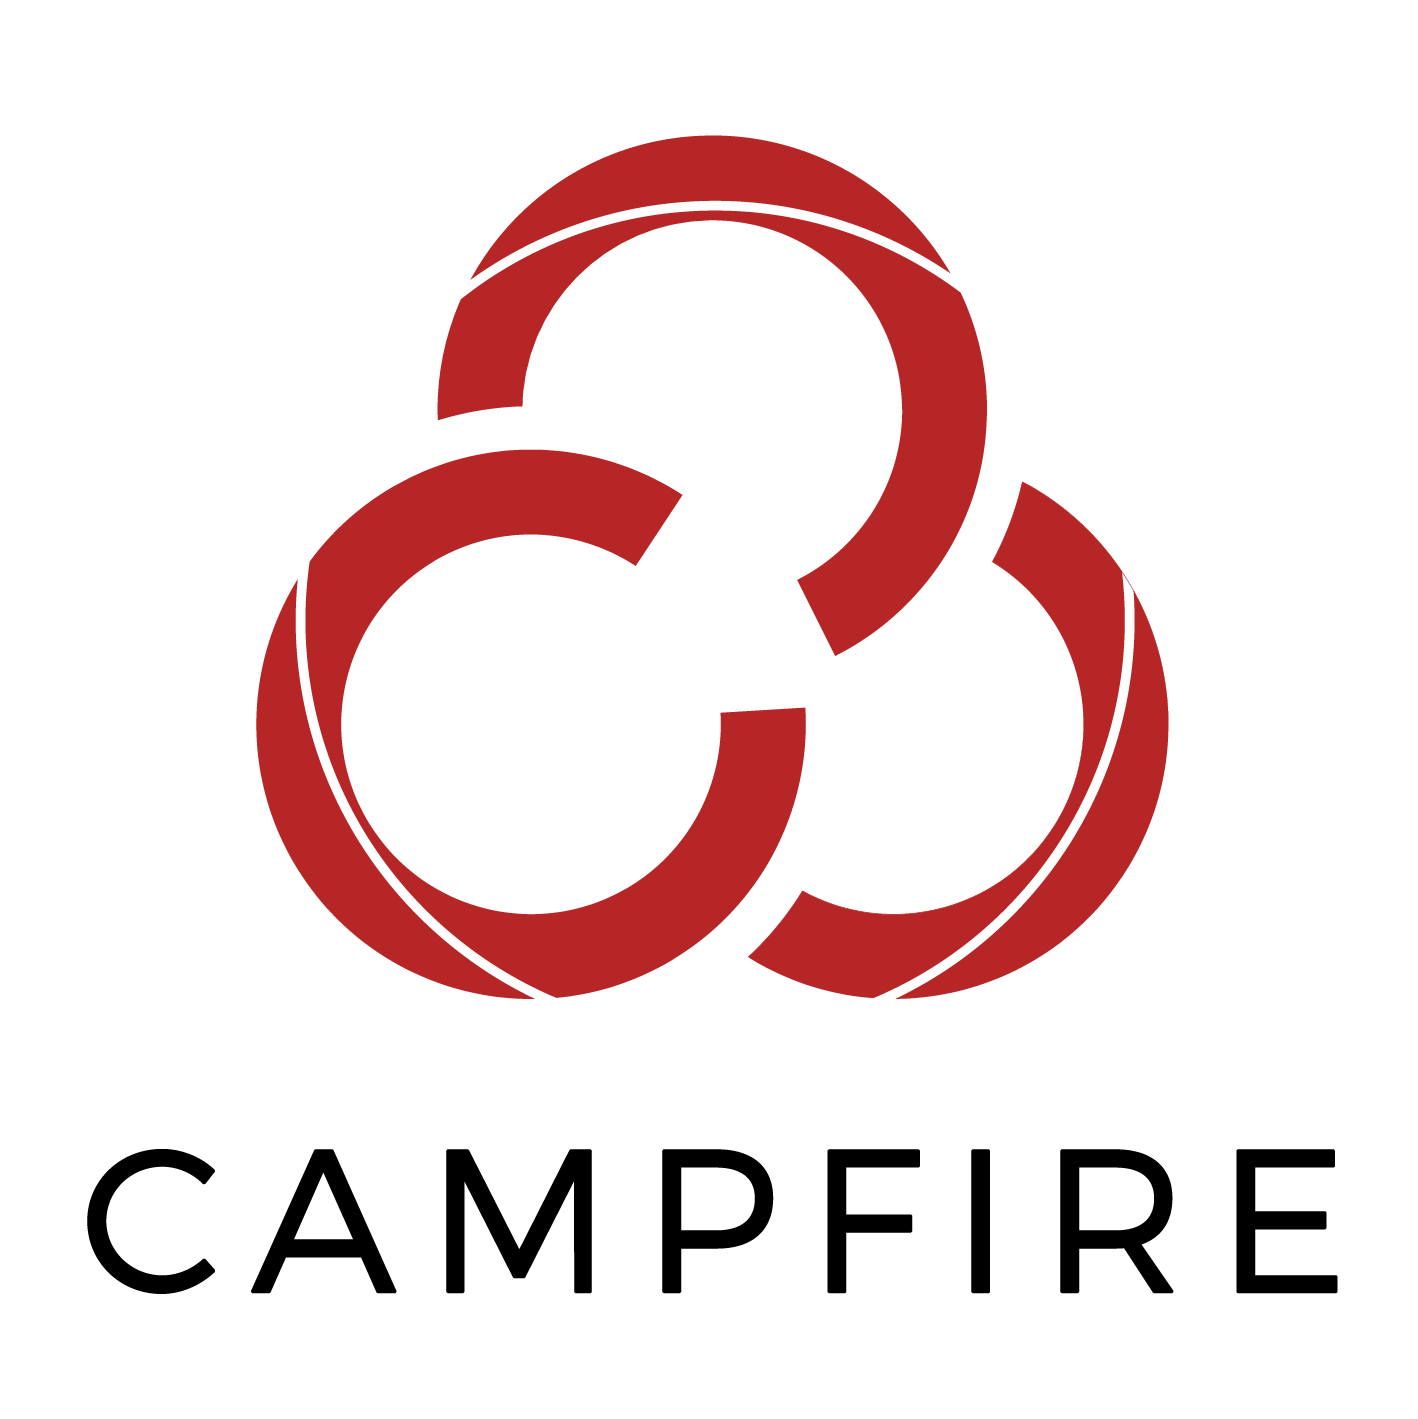 Campfire Logo - Latest News about Campfire Collaborative Spaces